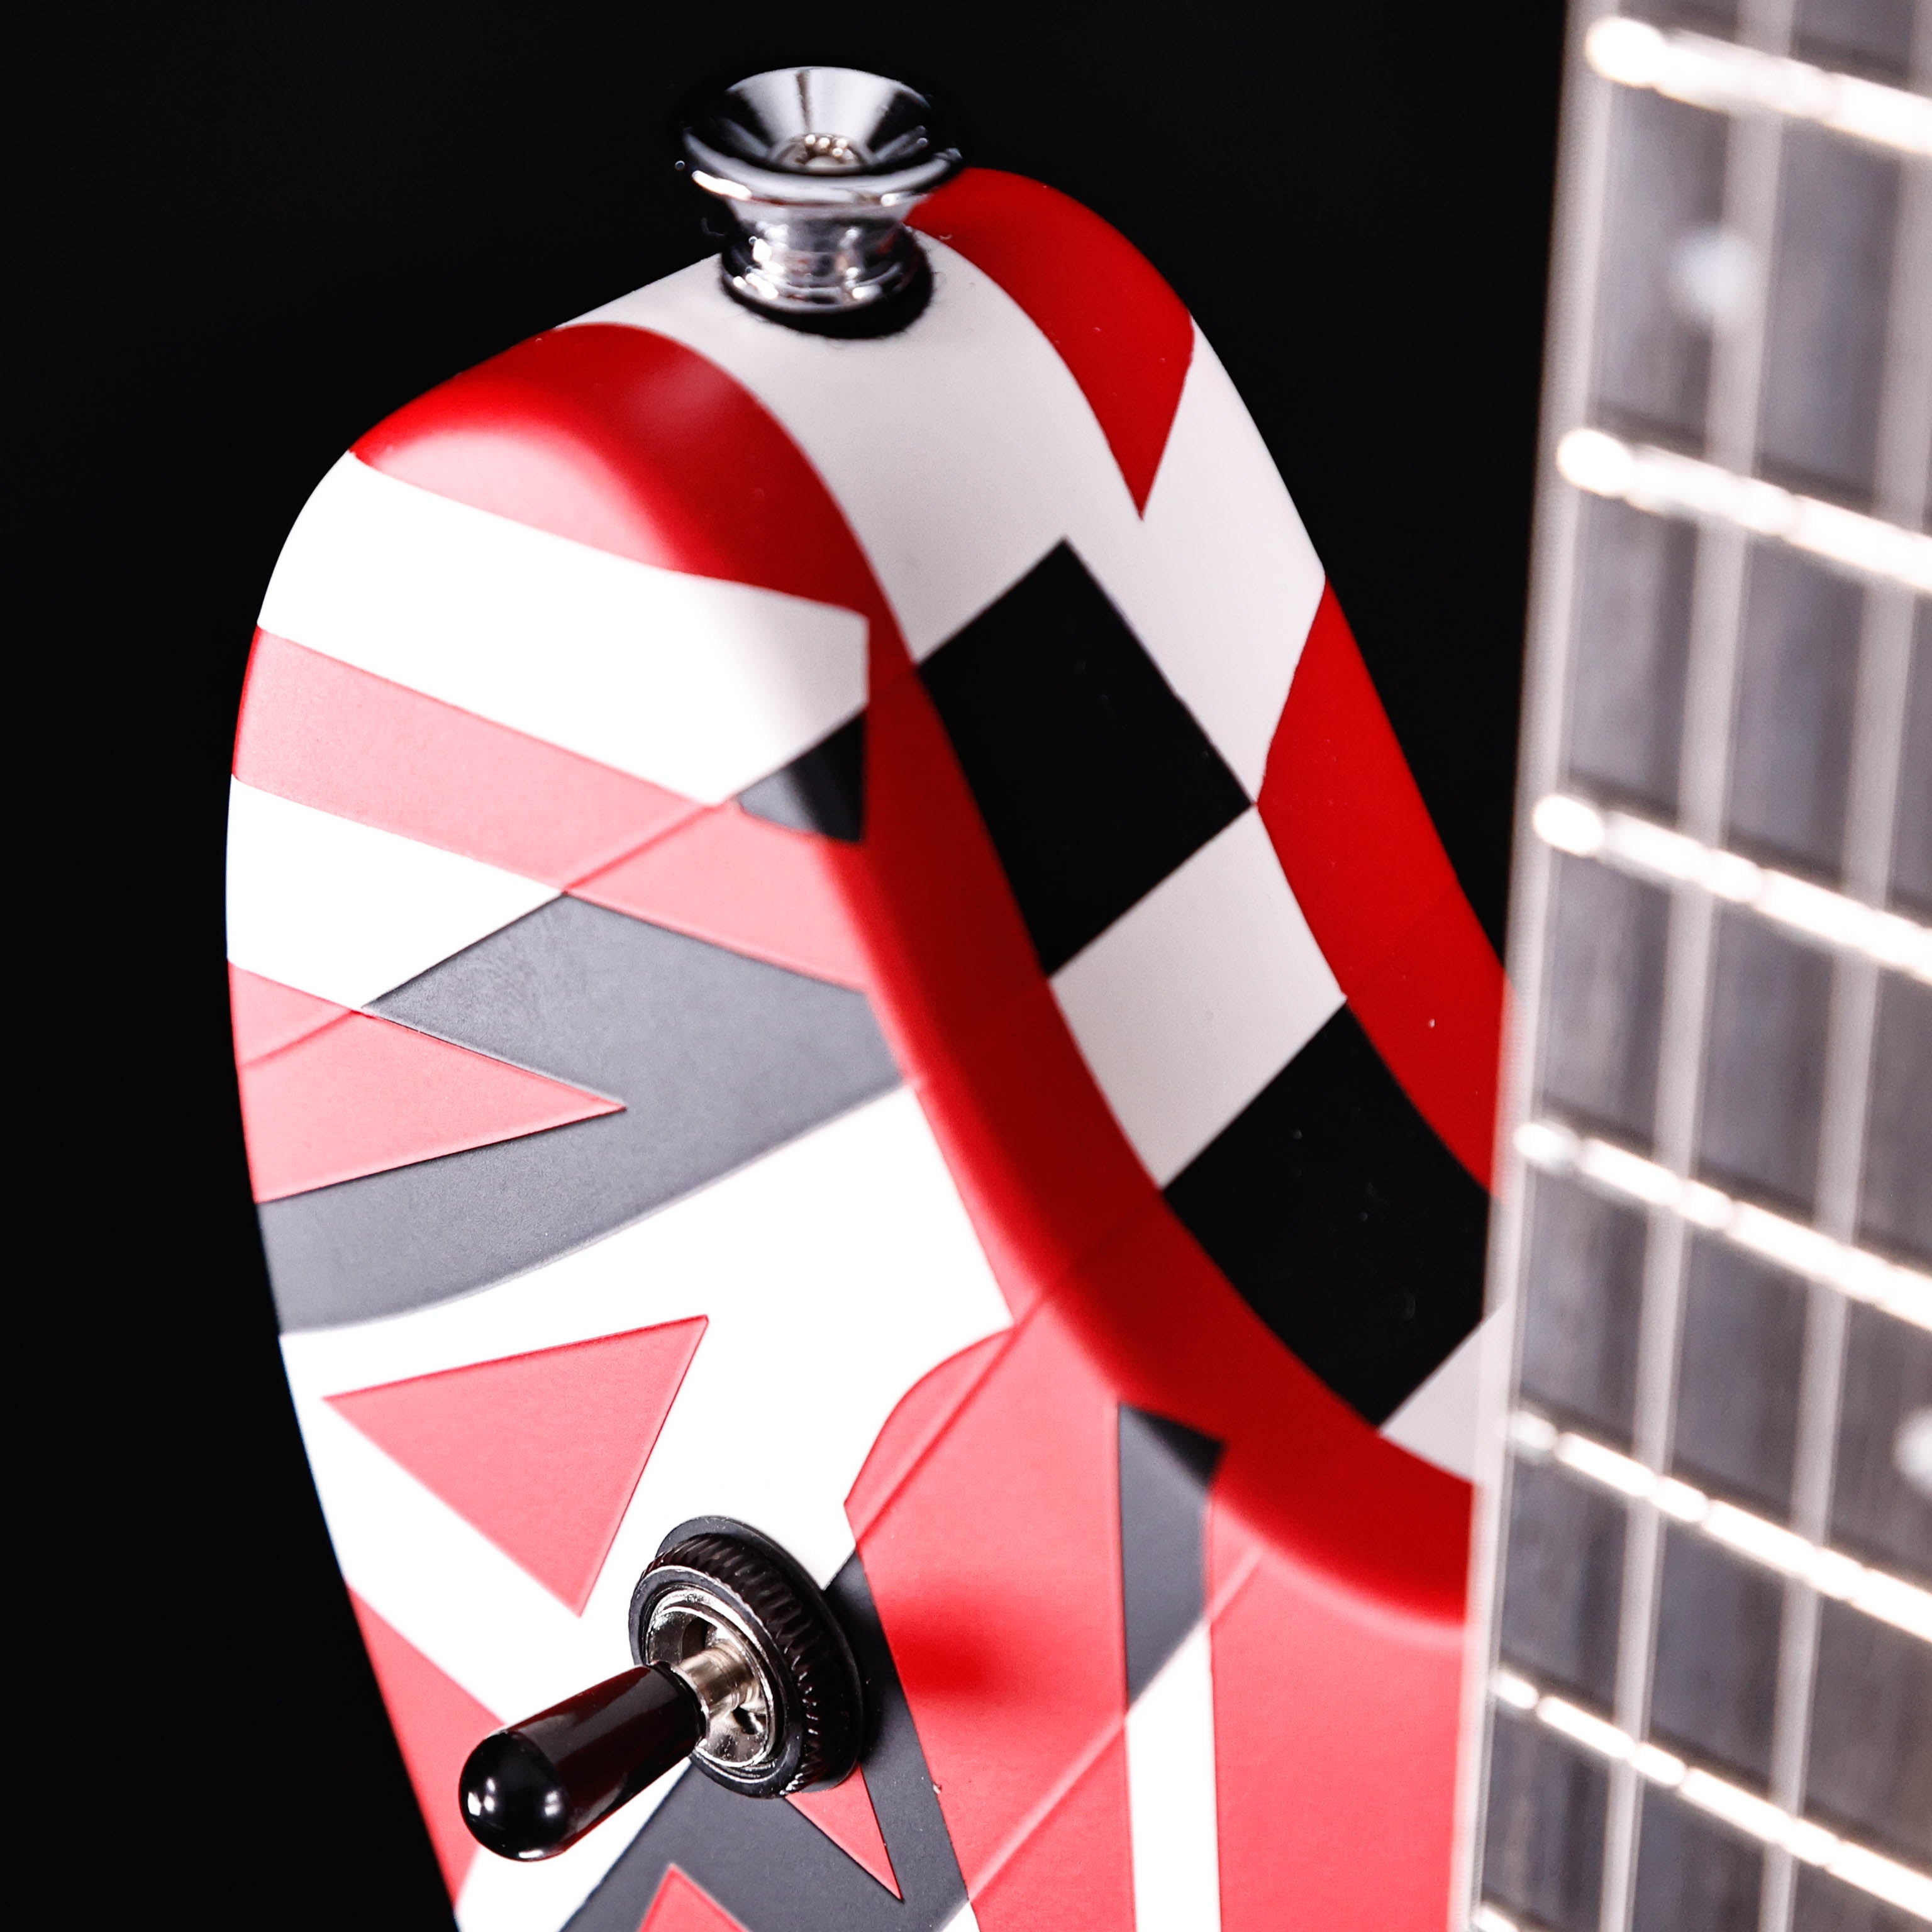 EVH Wolfgang Special Striped Series, Ebony Fb, Red, Black, and White 7lbs 11oz